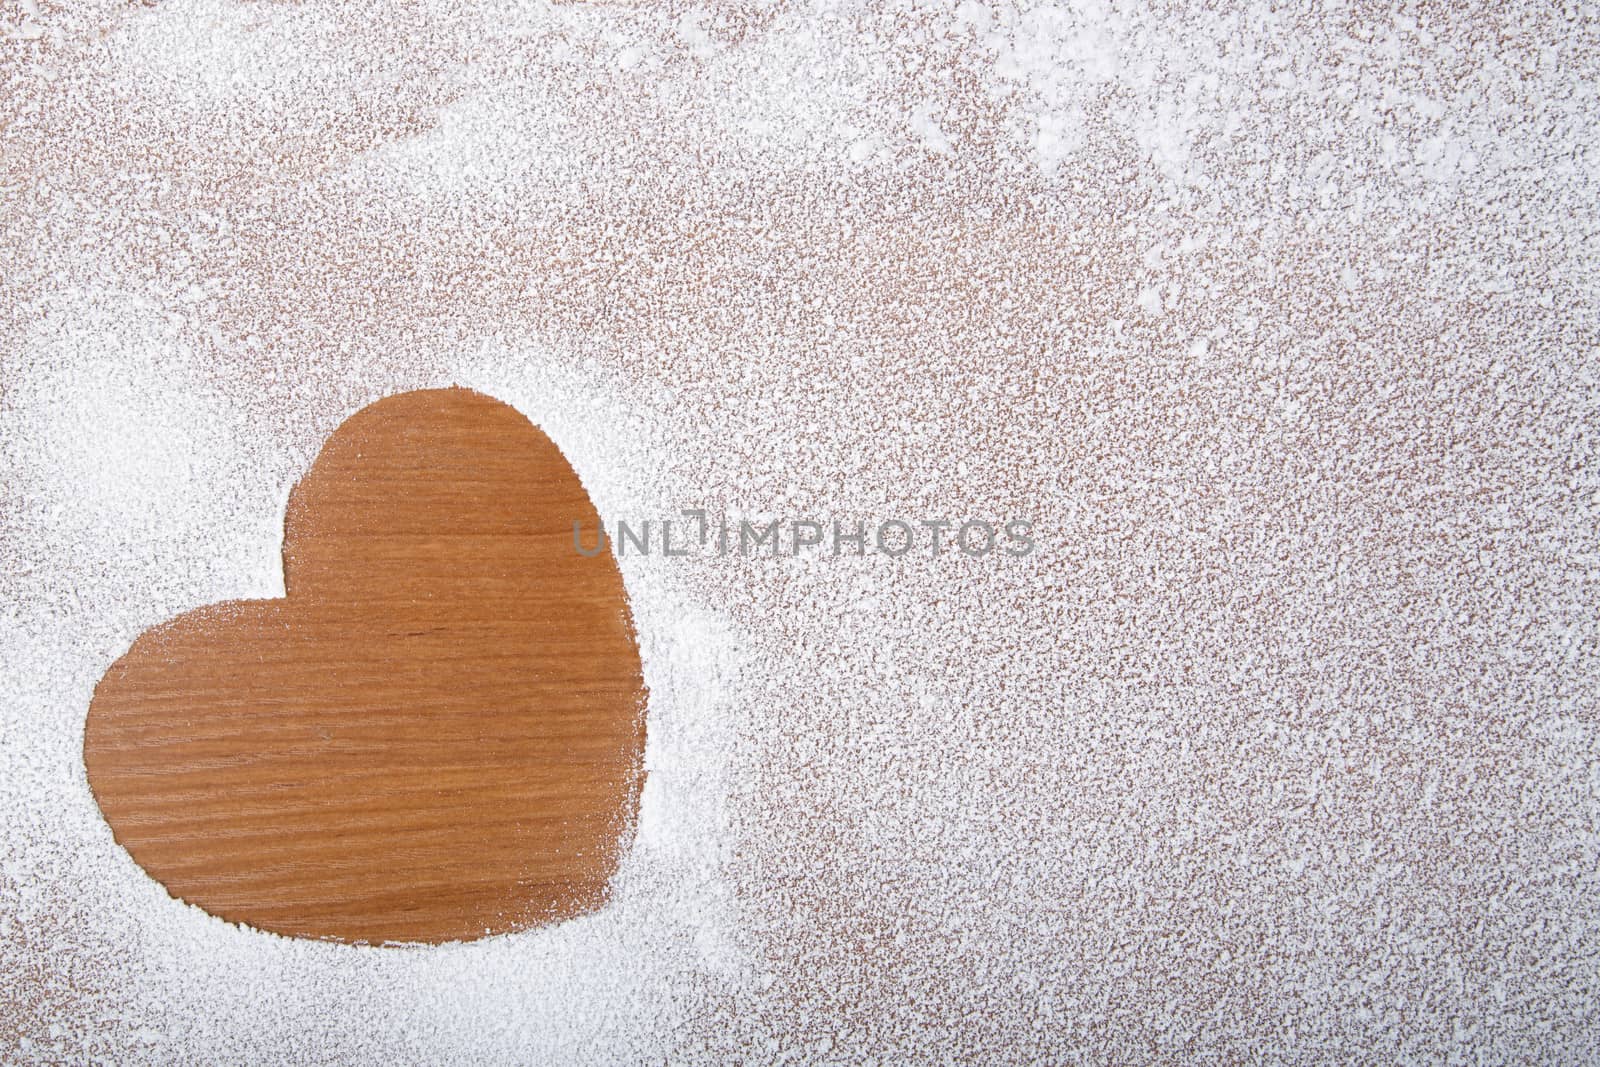 Heart in snow, a Valentine's Day theme by johan10